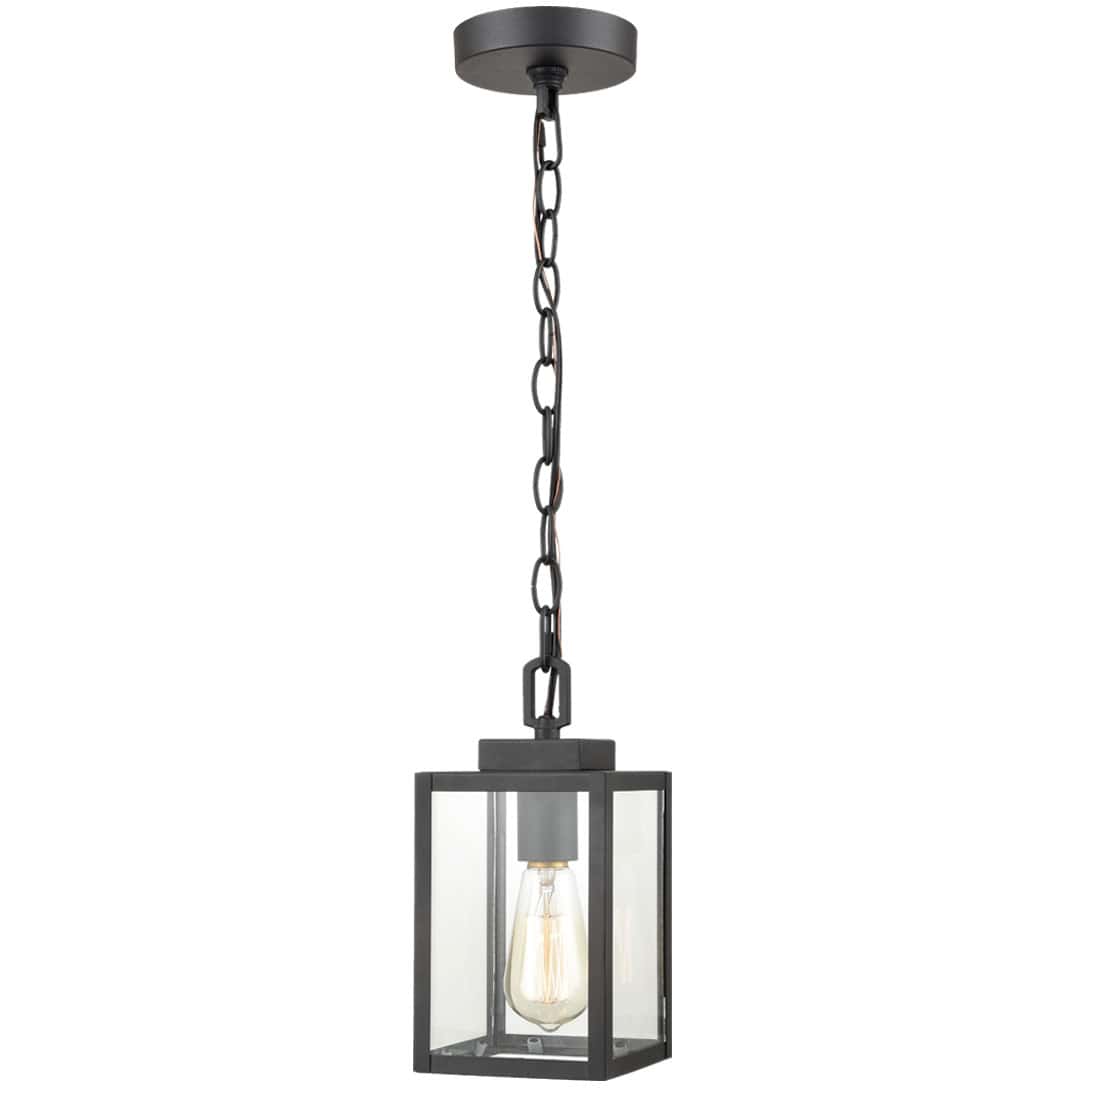 Outdoor Pendant Light Pendant Chain Adjustable Beionxii 1-Light Exterior Hanging Lantern in Oil Rubbed Bronze Finish with Water Ripple Glass Shade 